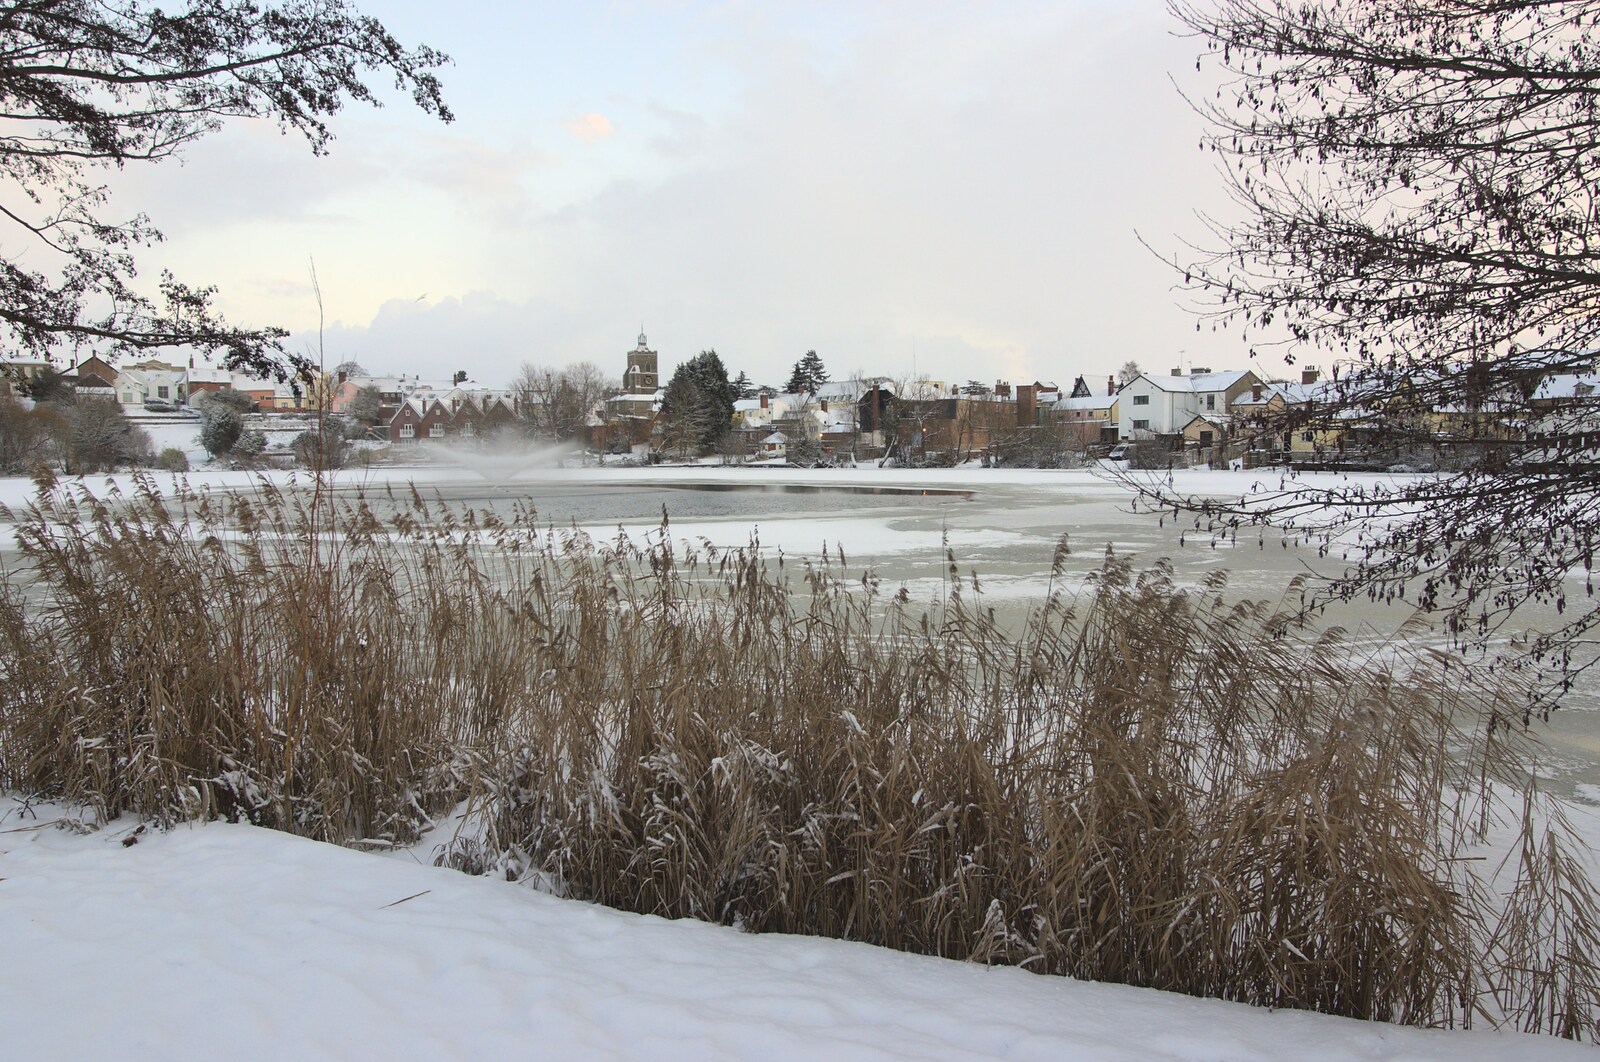 A Snowy Miscellany, Diss, Norfolk - 9th January 2010: At 7:45am - Diss and the Mere